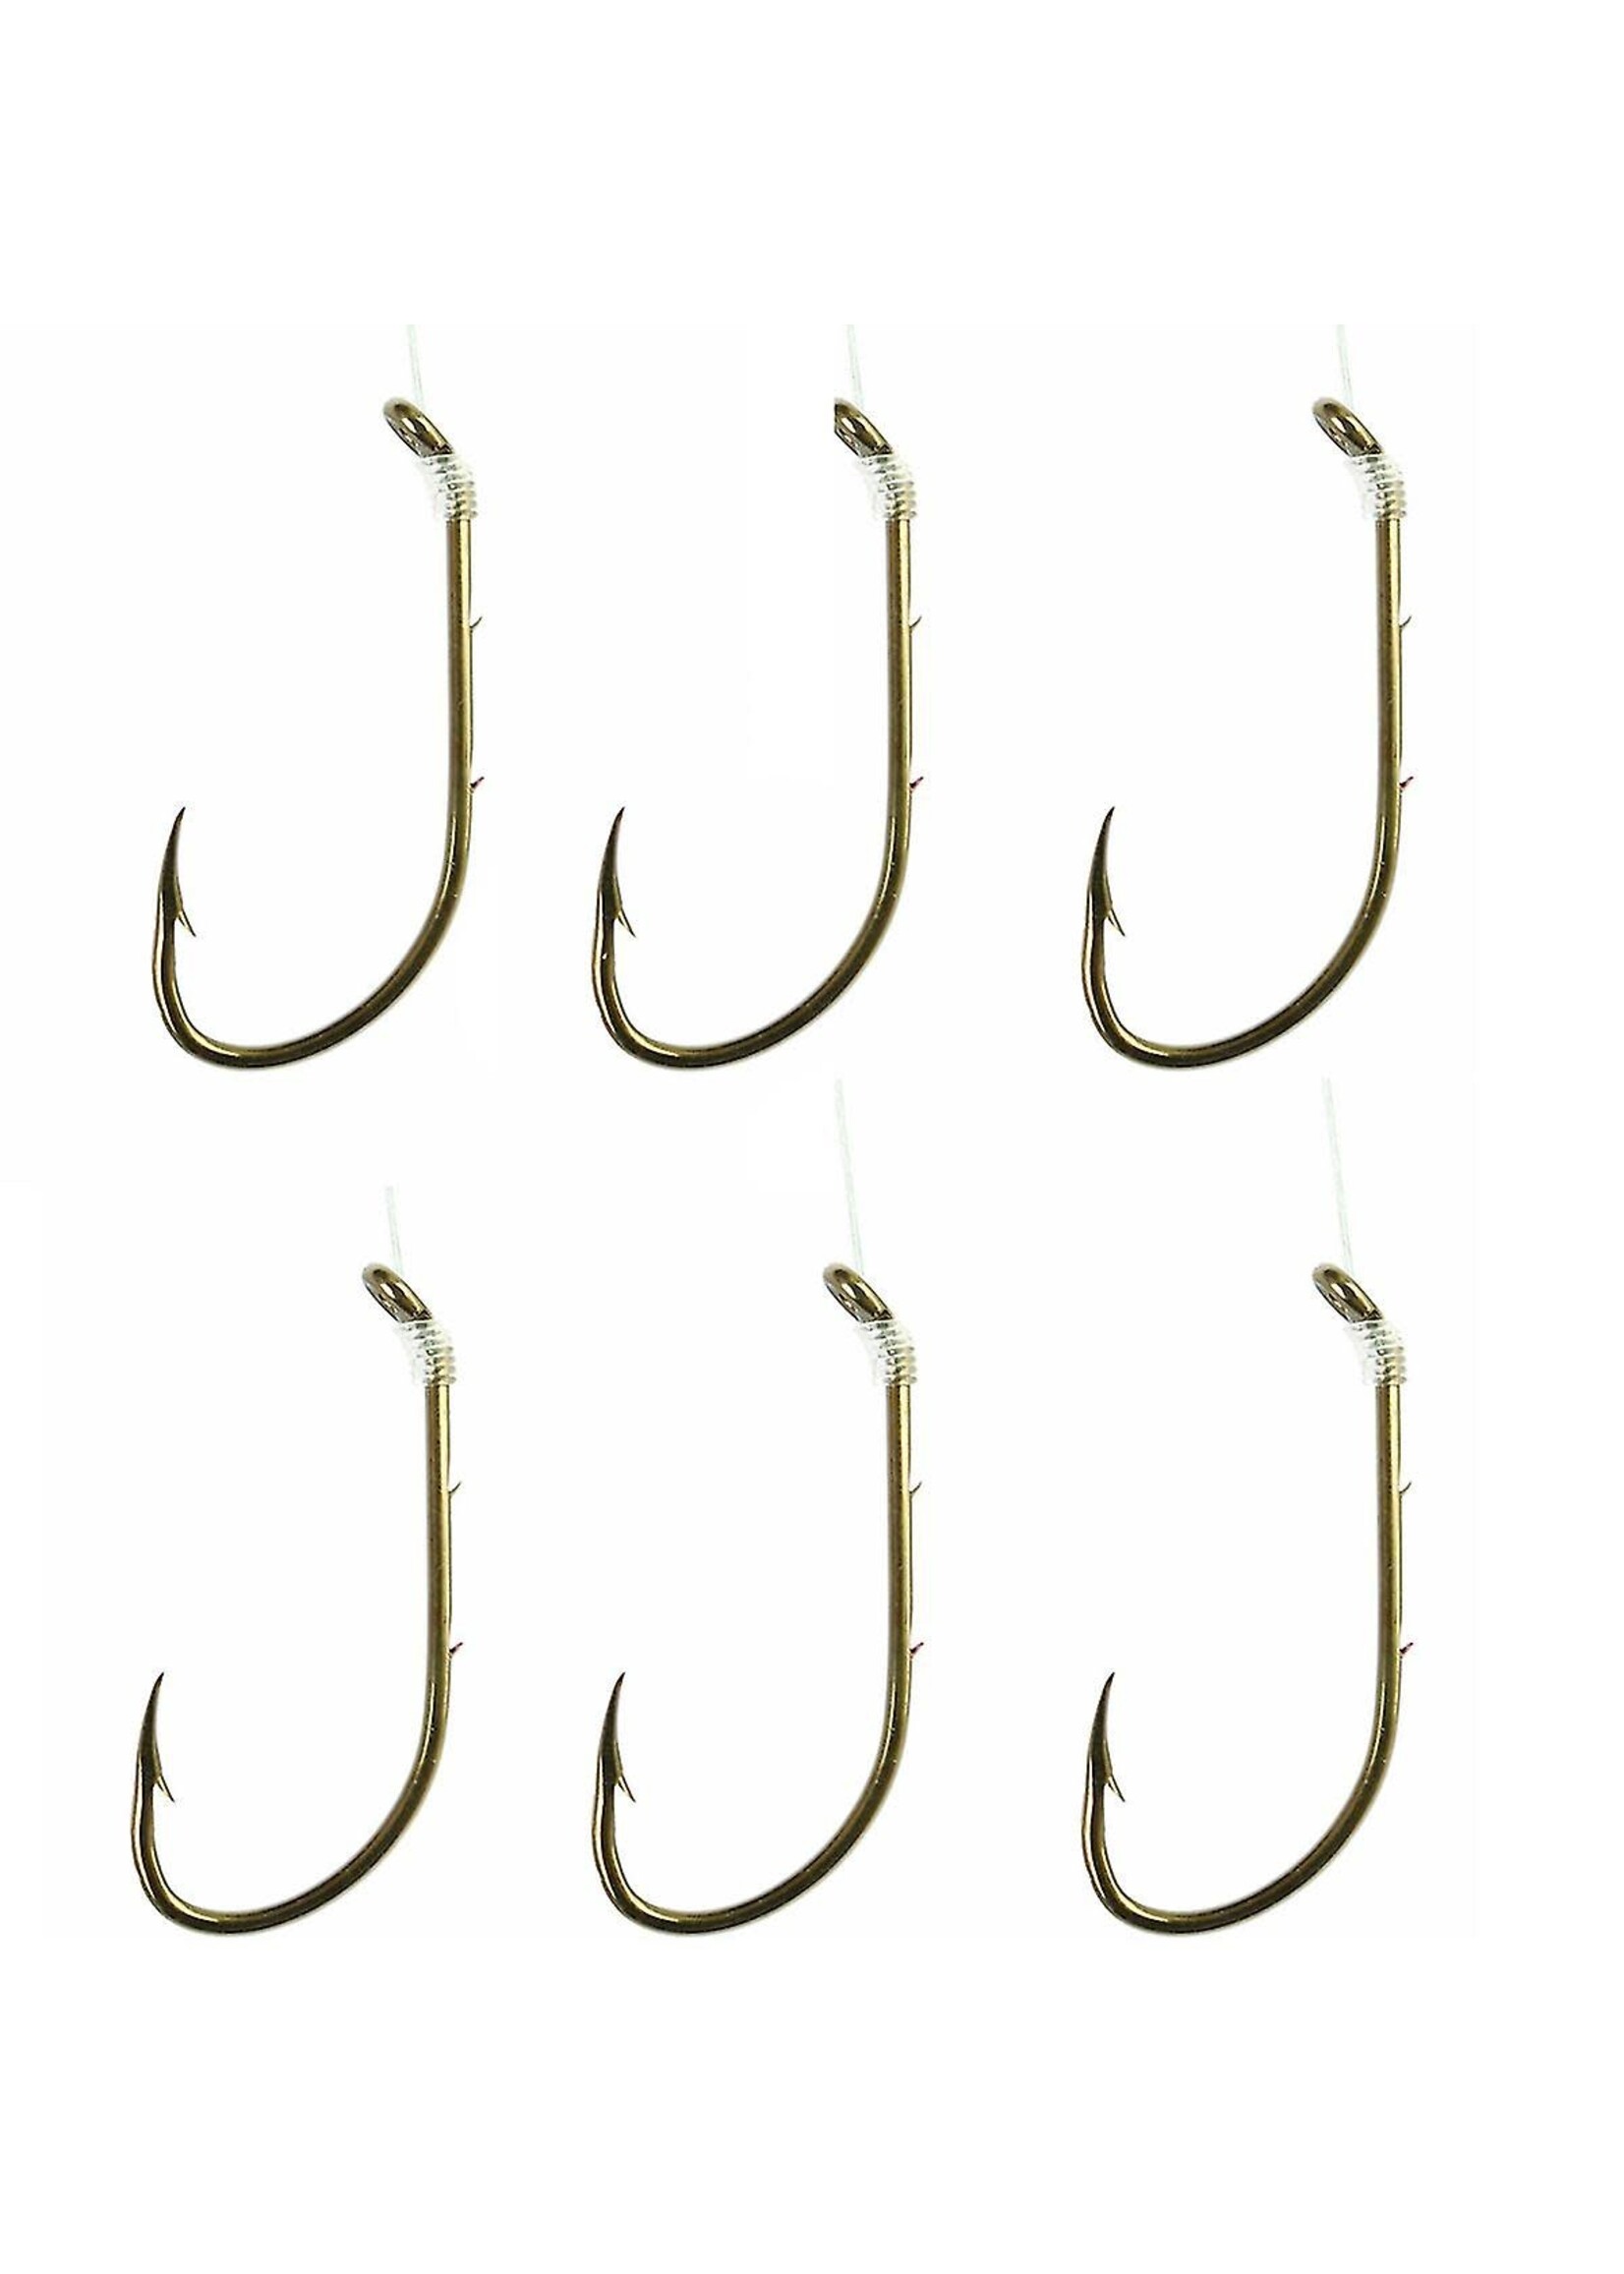 Eagle Claw EAGLE CLAW13010-001 LAKER SNELLED HOOKS Sz1 BAITHOLDER BRONZE  6Pk - Cheap Seats Sports Excellence